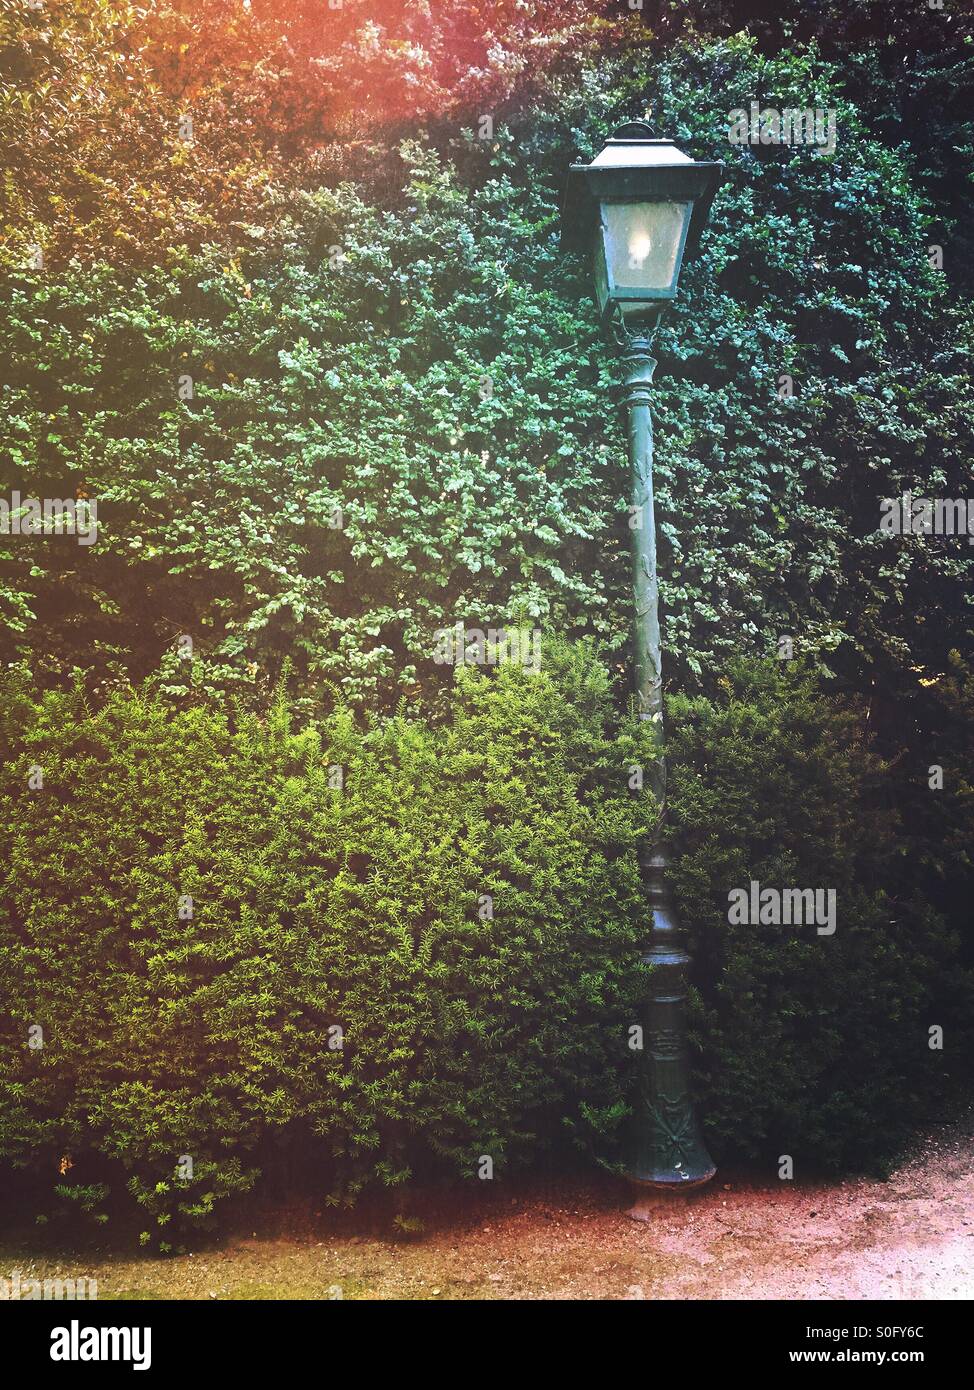 Old lamppost overtaken by shrubbery in park Stock Photo